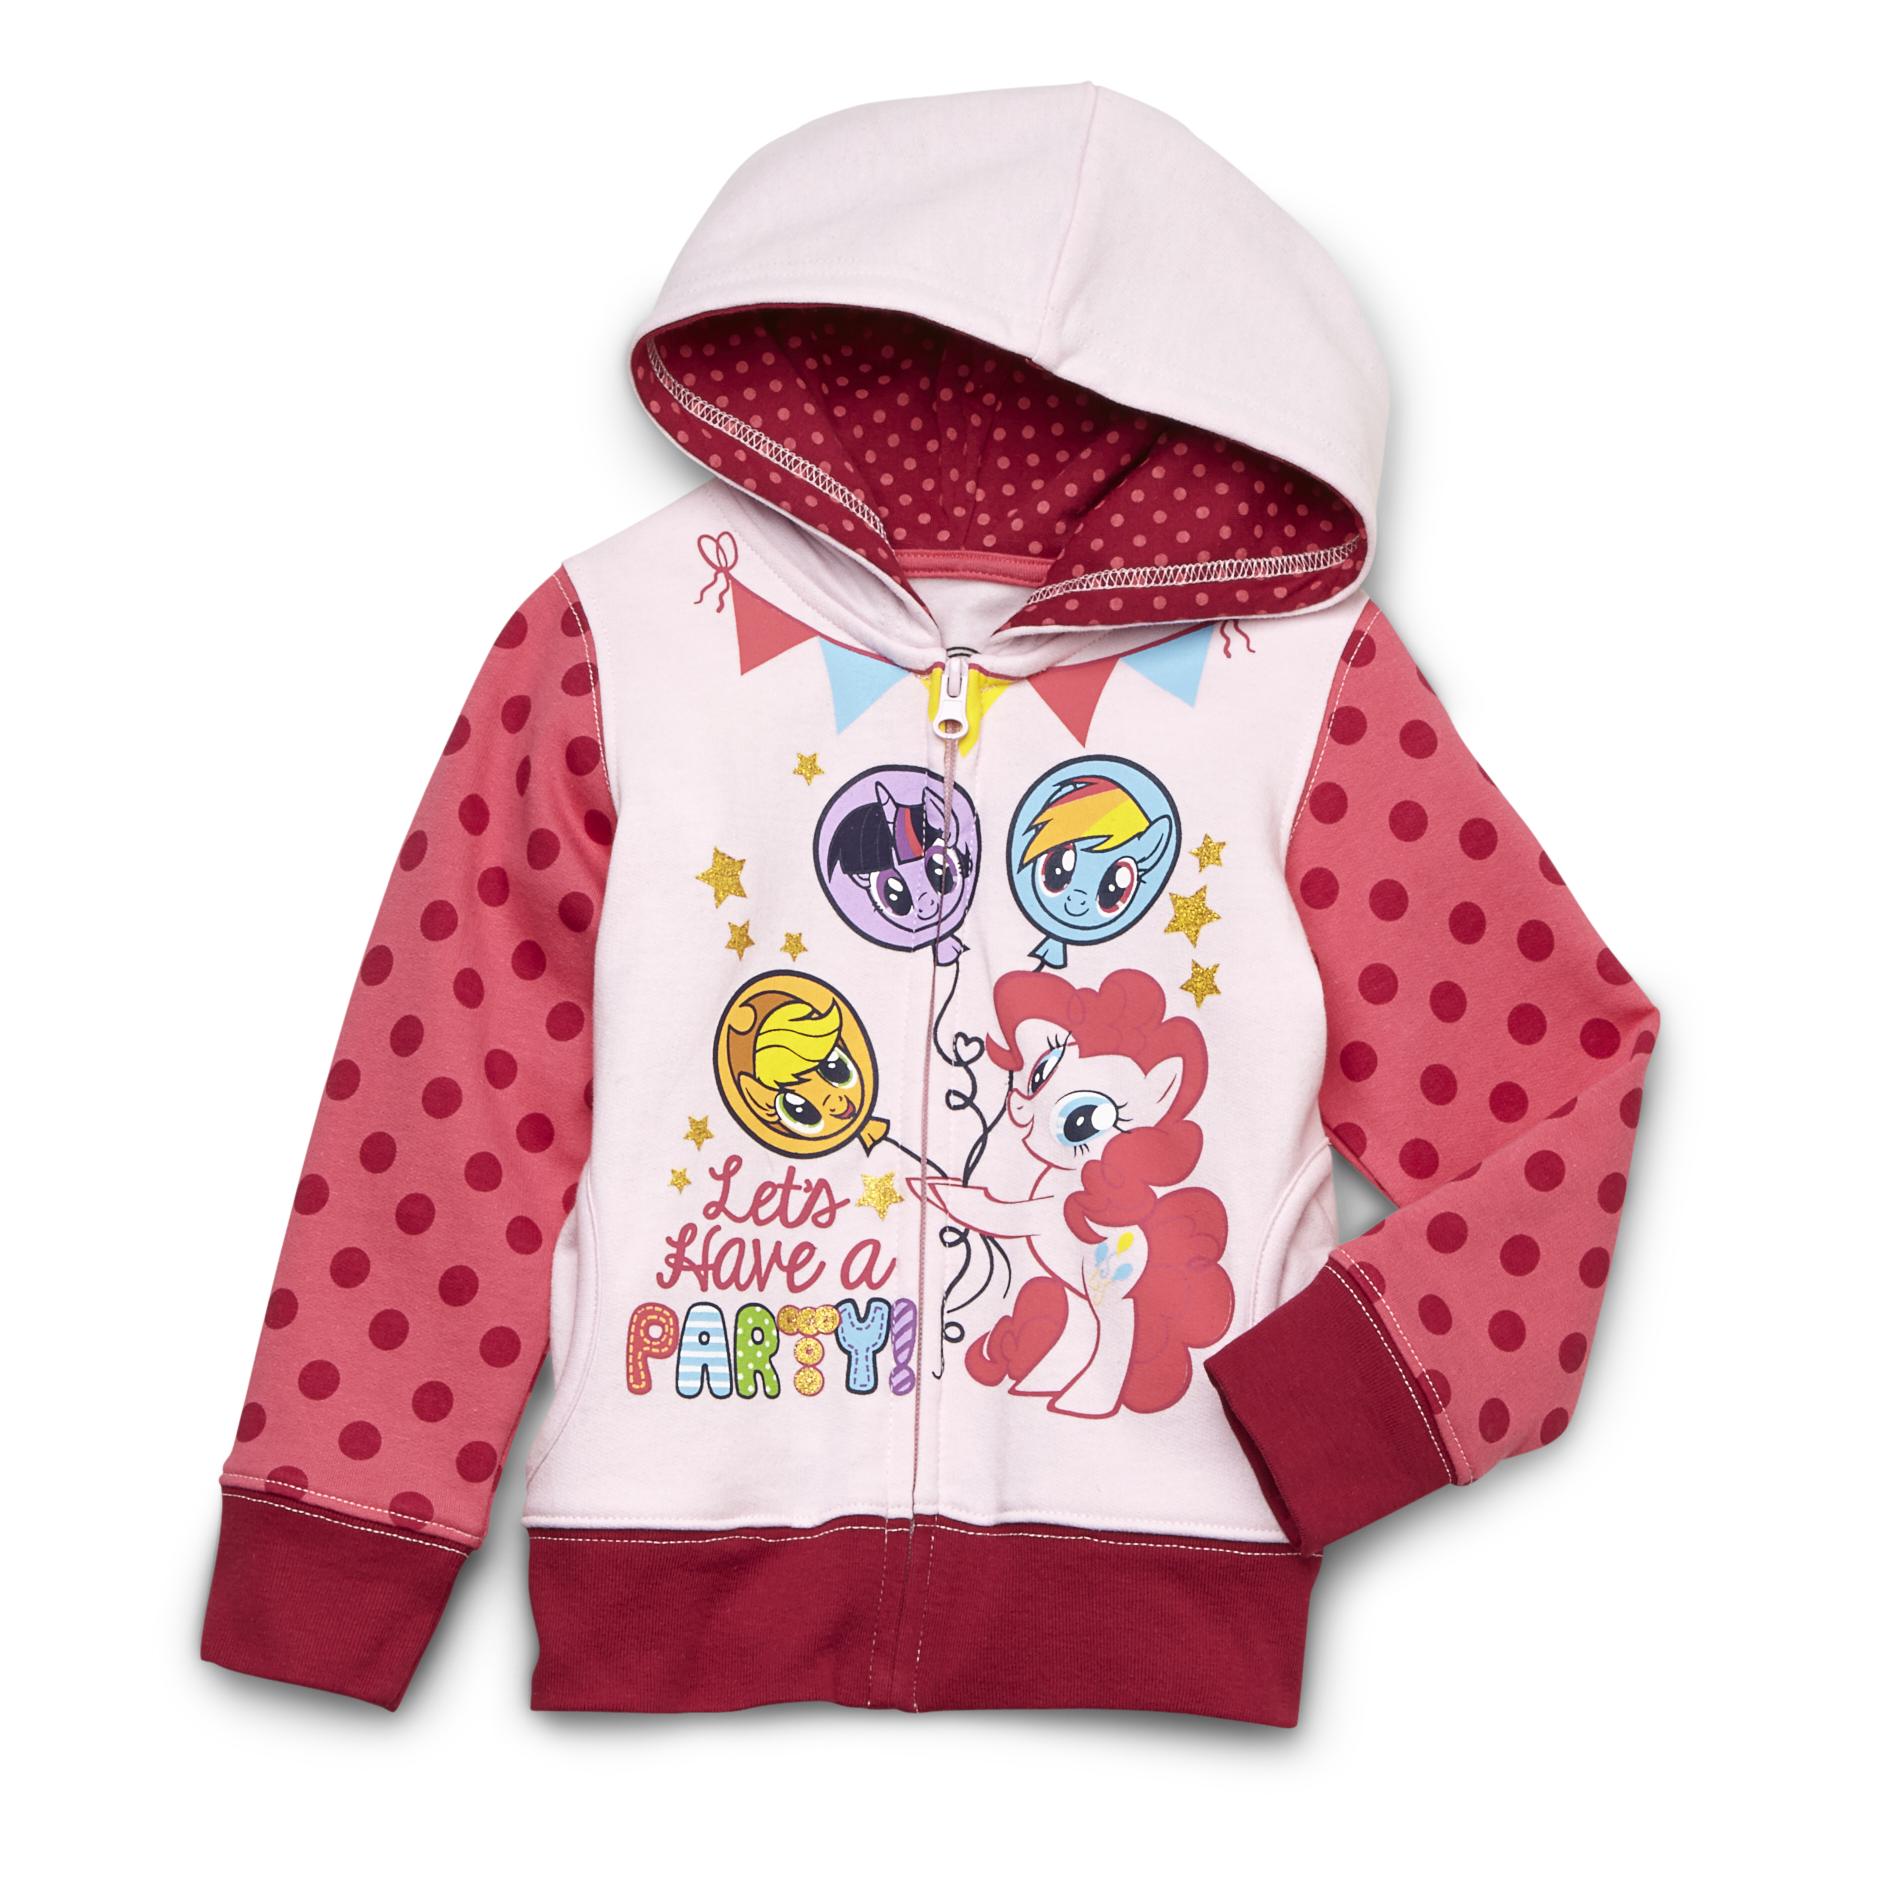 My Little Pony Toddler Girl's Hoodie Jacket